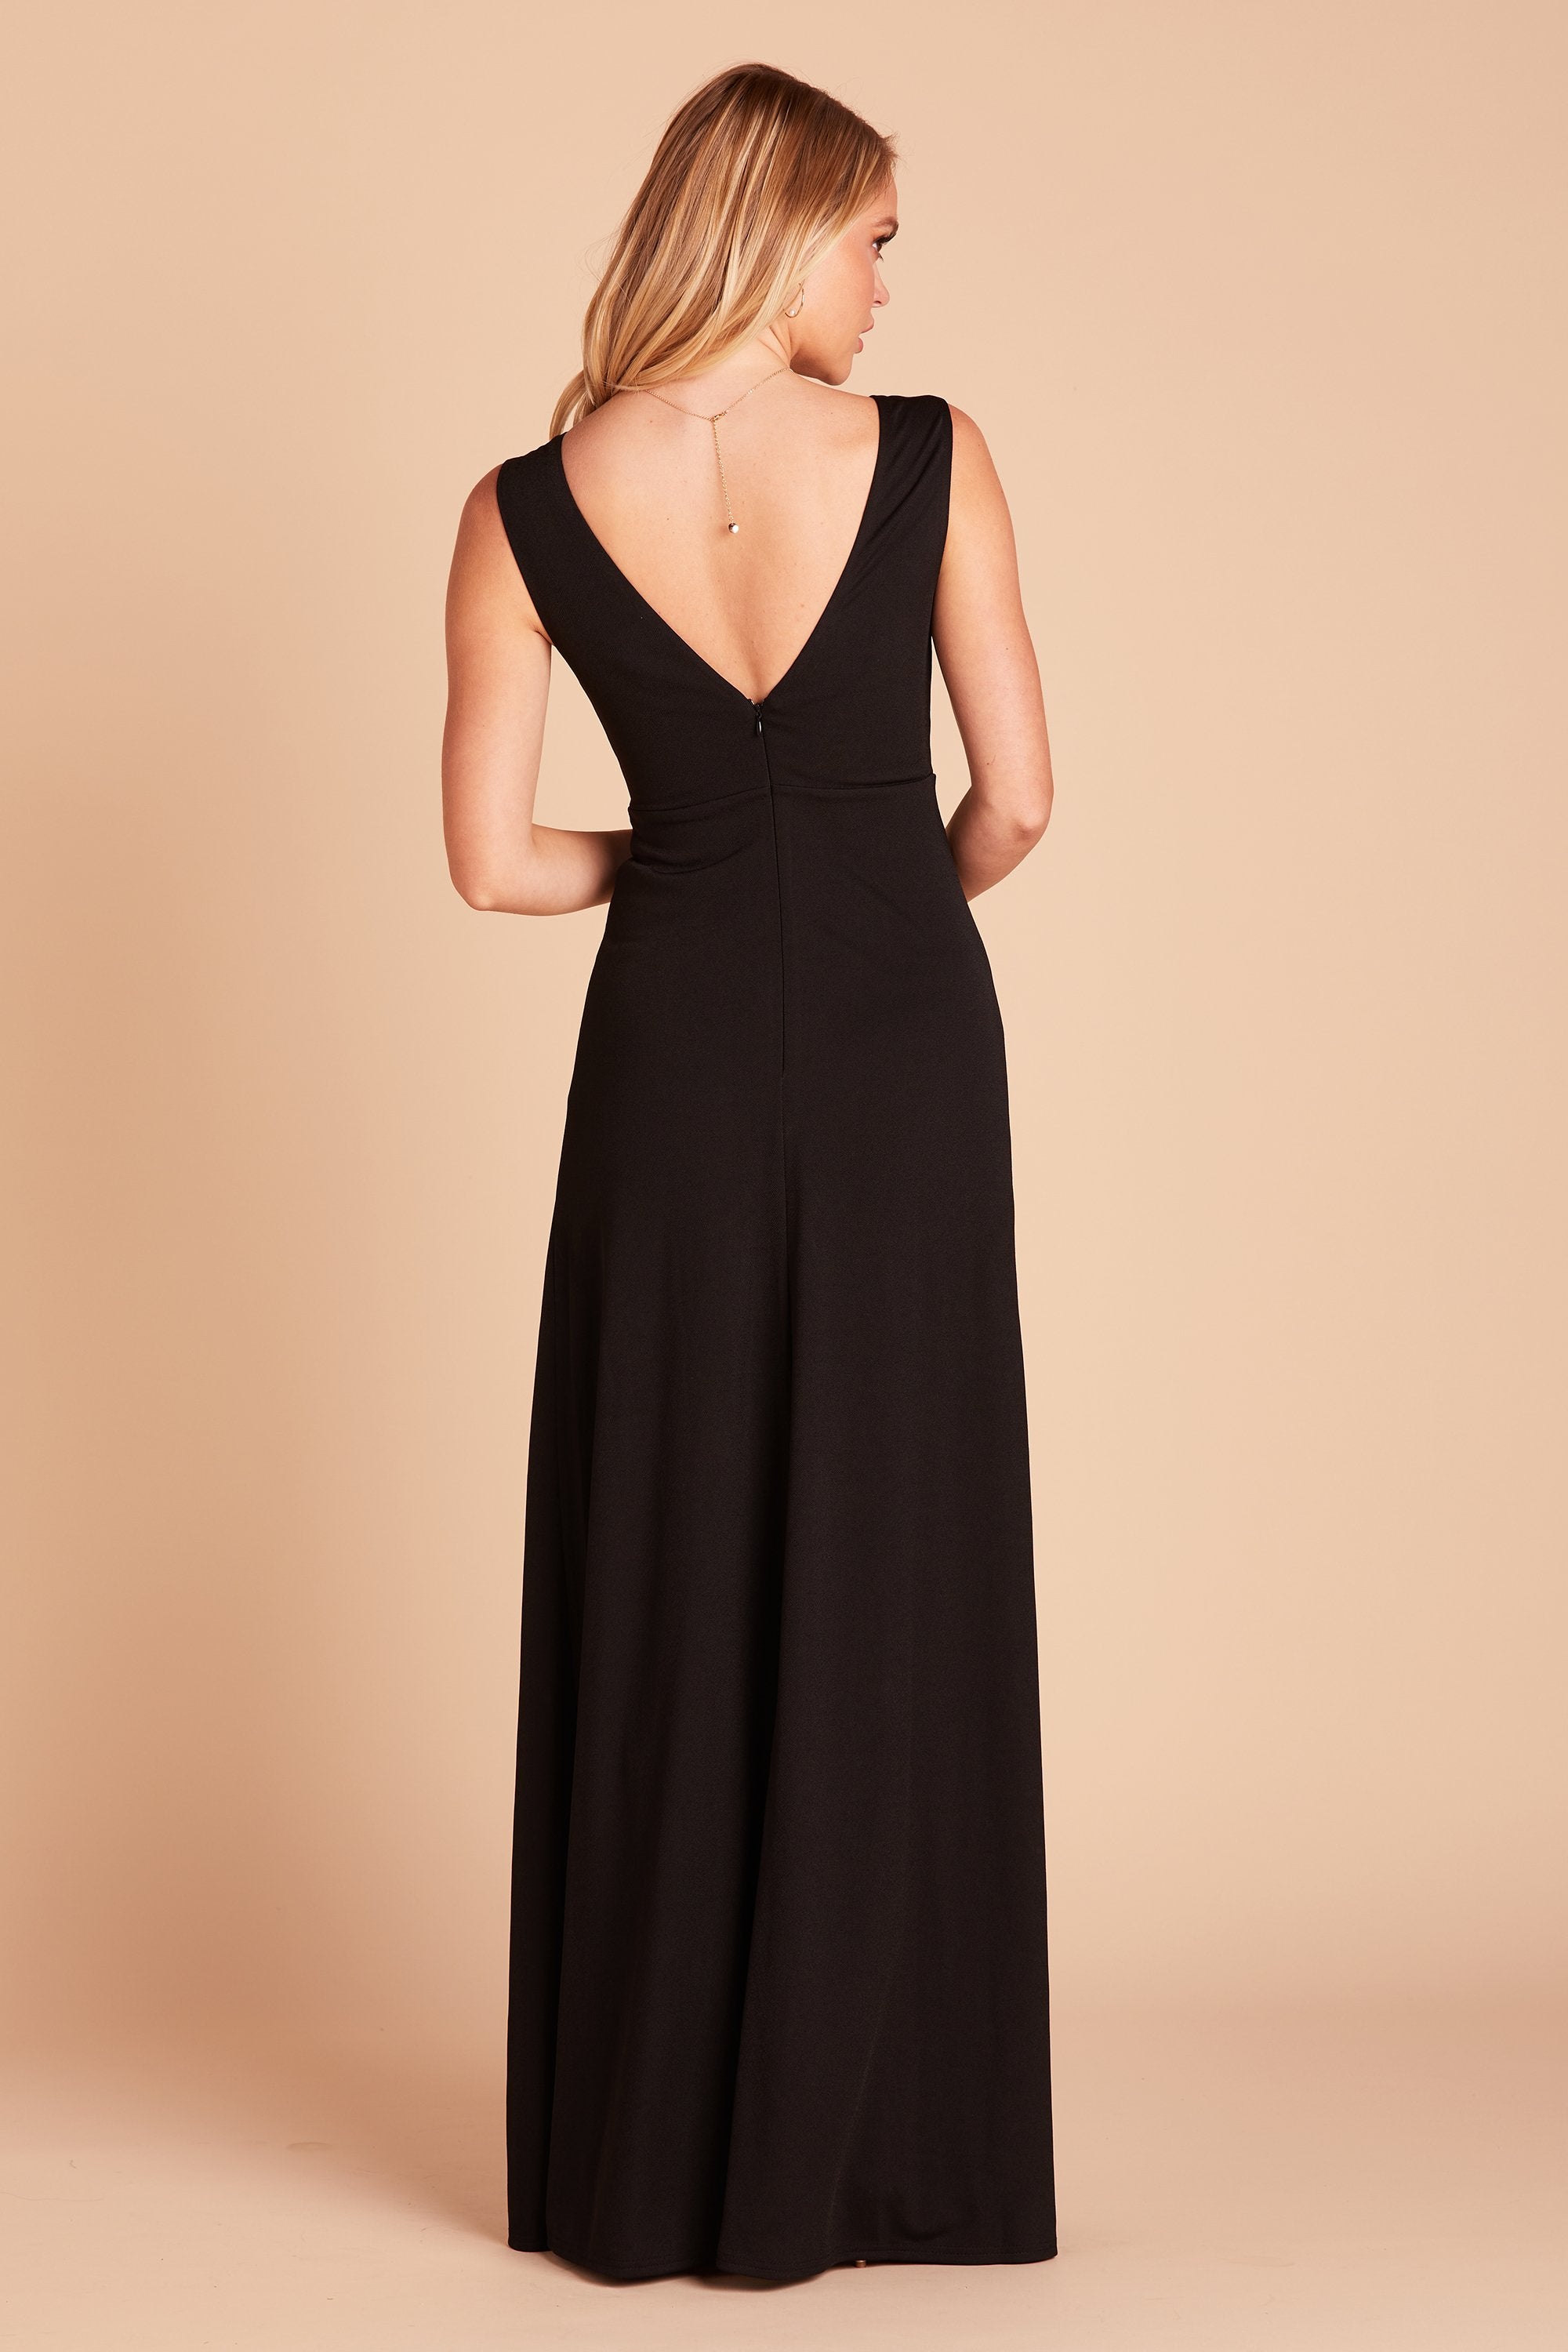 Shamin bridesmaid dress in black crepe by Birdy Grey, back view